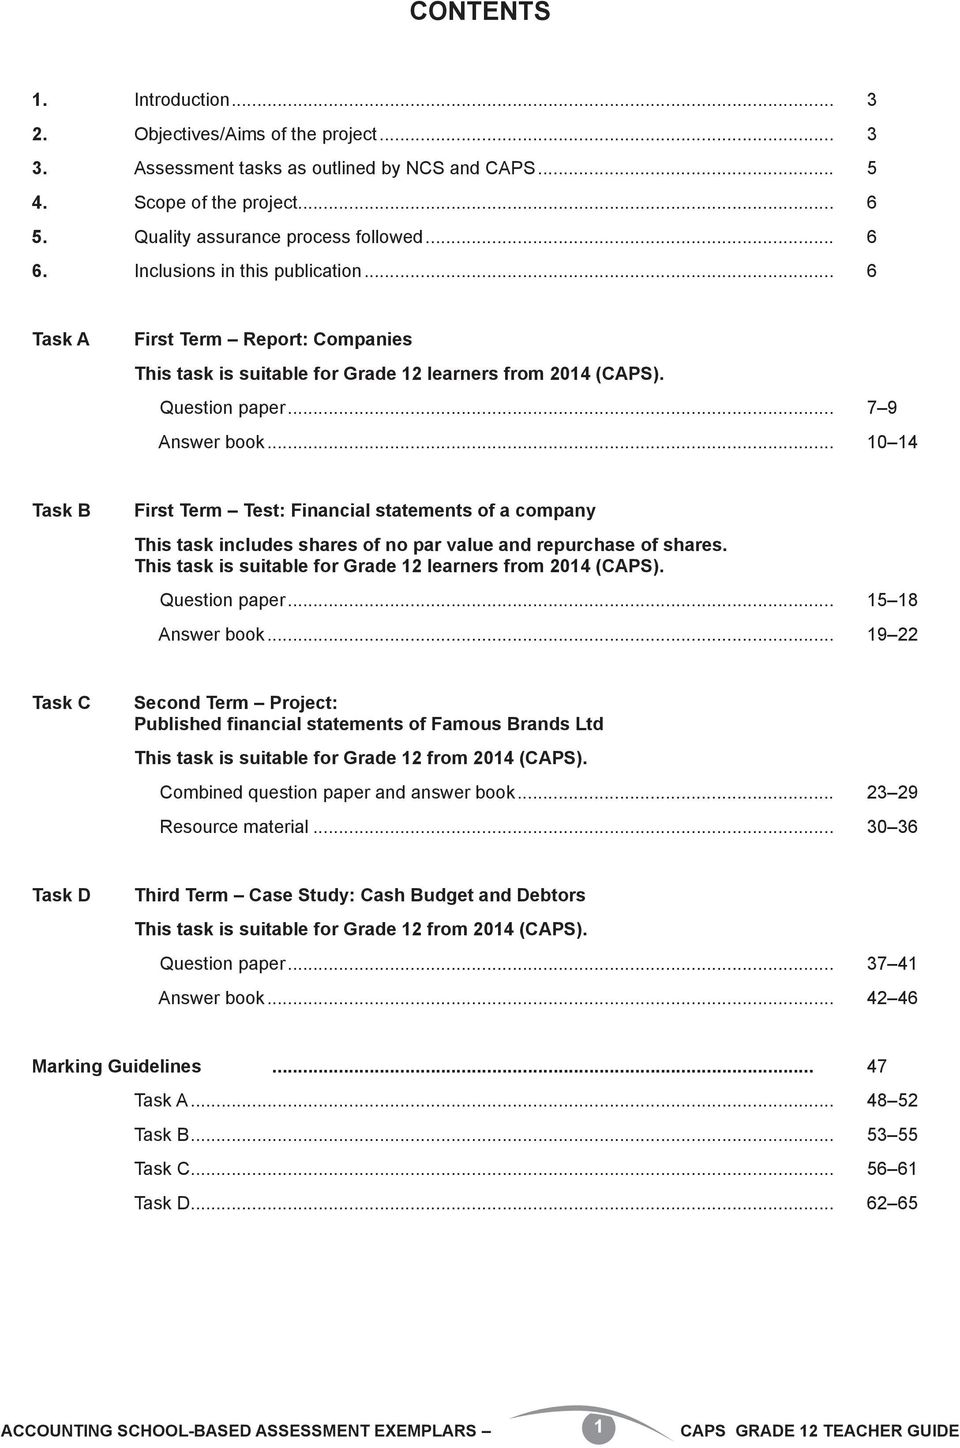 .. 10 14 Task B First Term Test: Financial statements of a company This task includes shares of no par value and repurchase of shares. This task is suitable for Grade 12 learners from 2014 (CAPS).